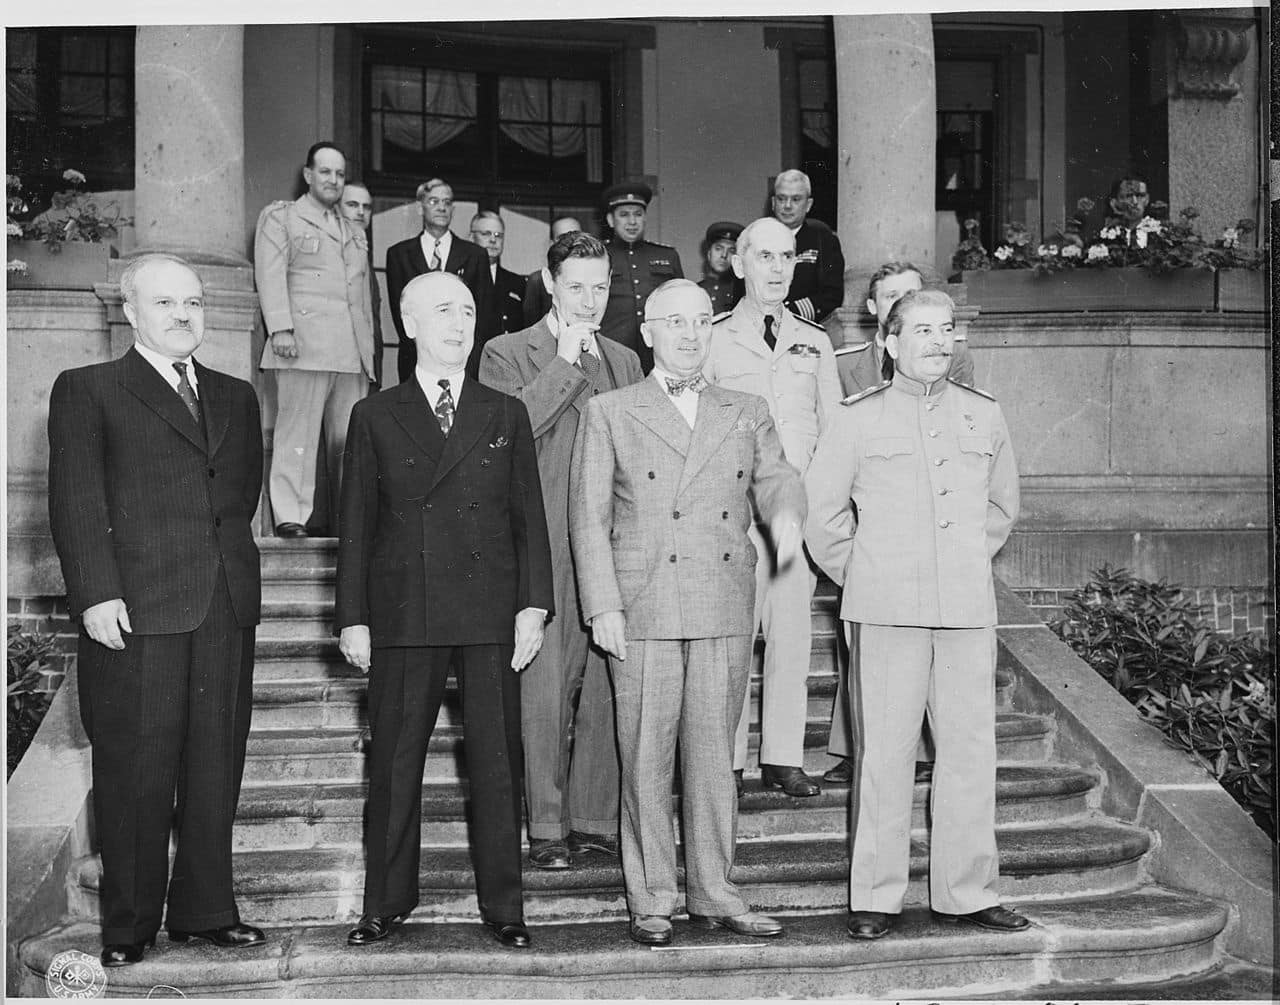 The Potsdam Conference - July 17th 1945 - Truman and Stalin meet for the first time